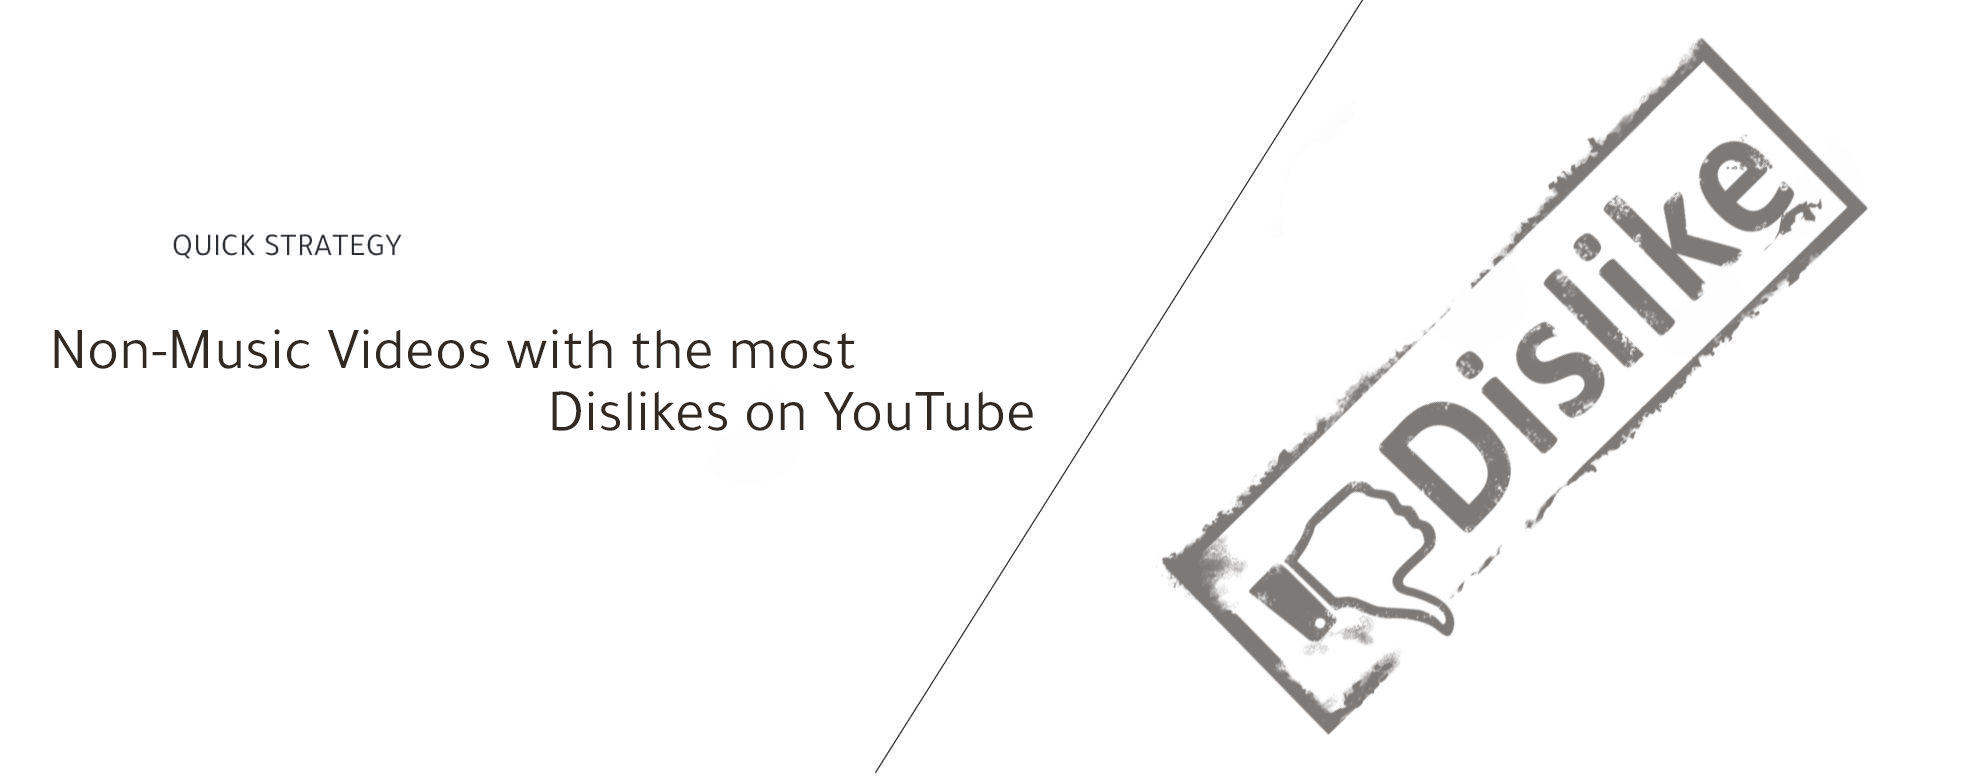 Non-Music Videos with the most Dislikes on YouTube